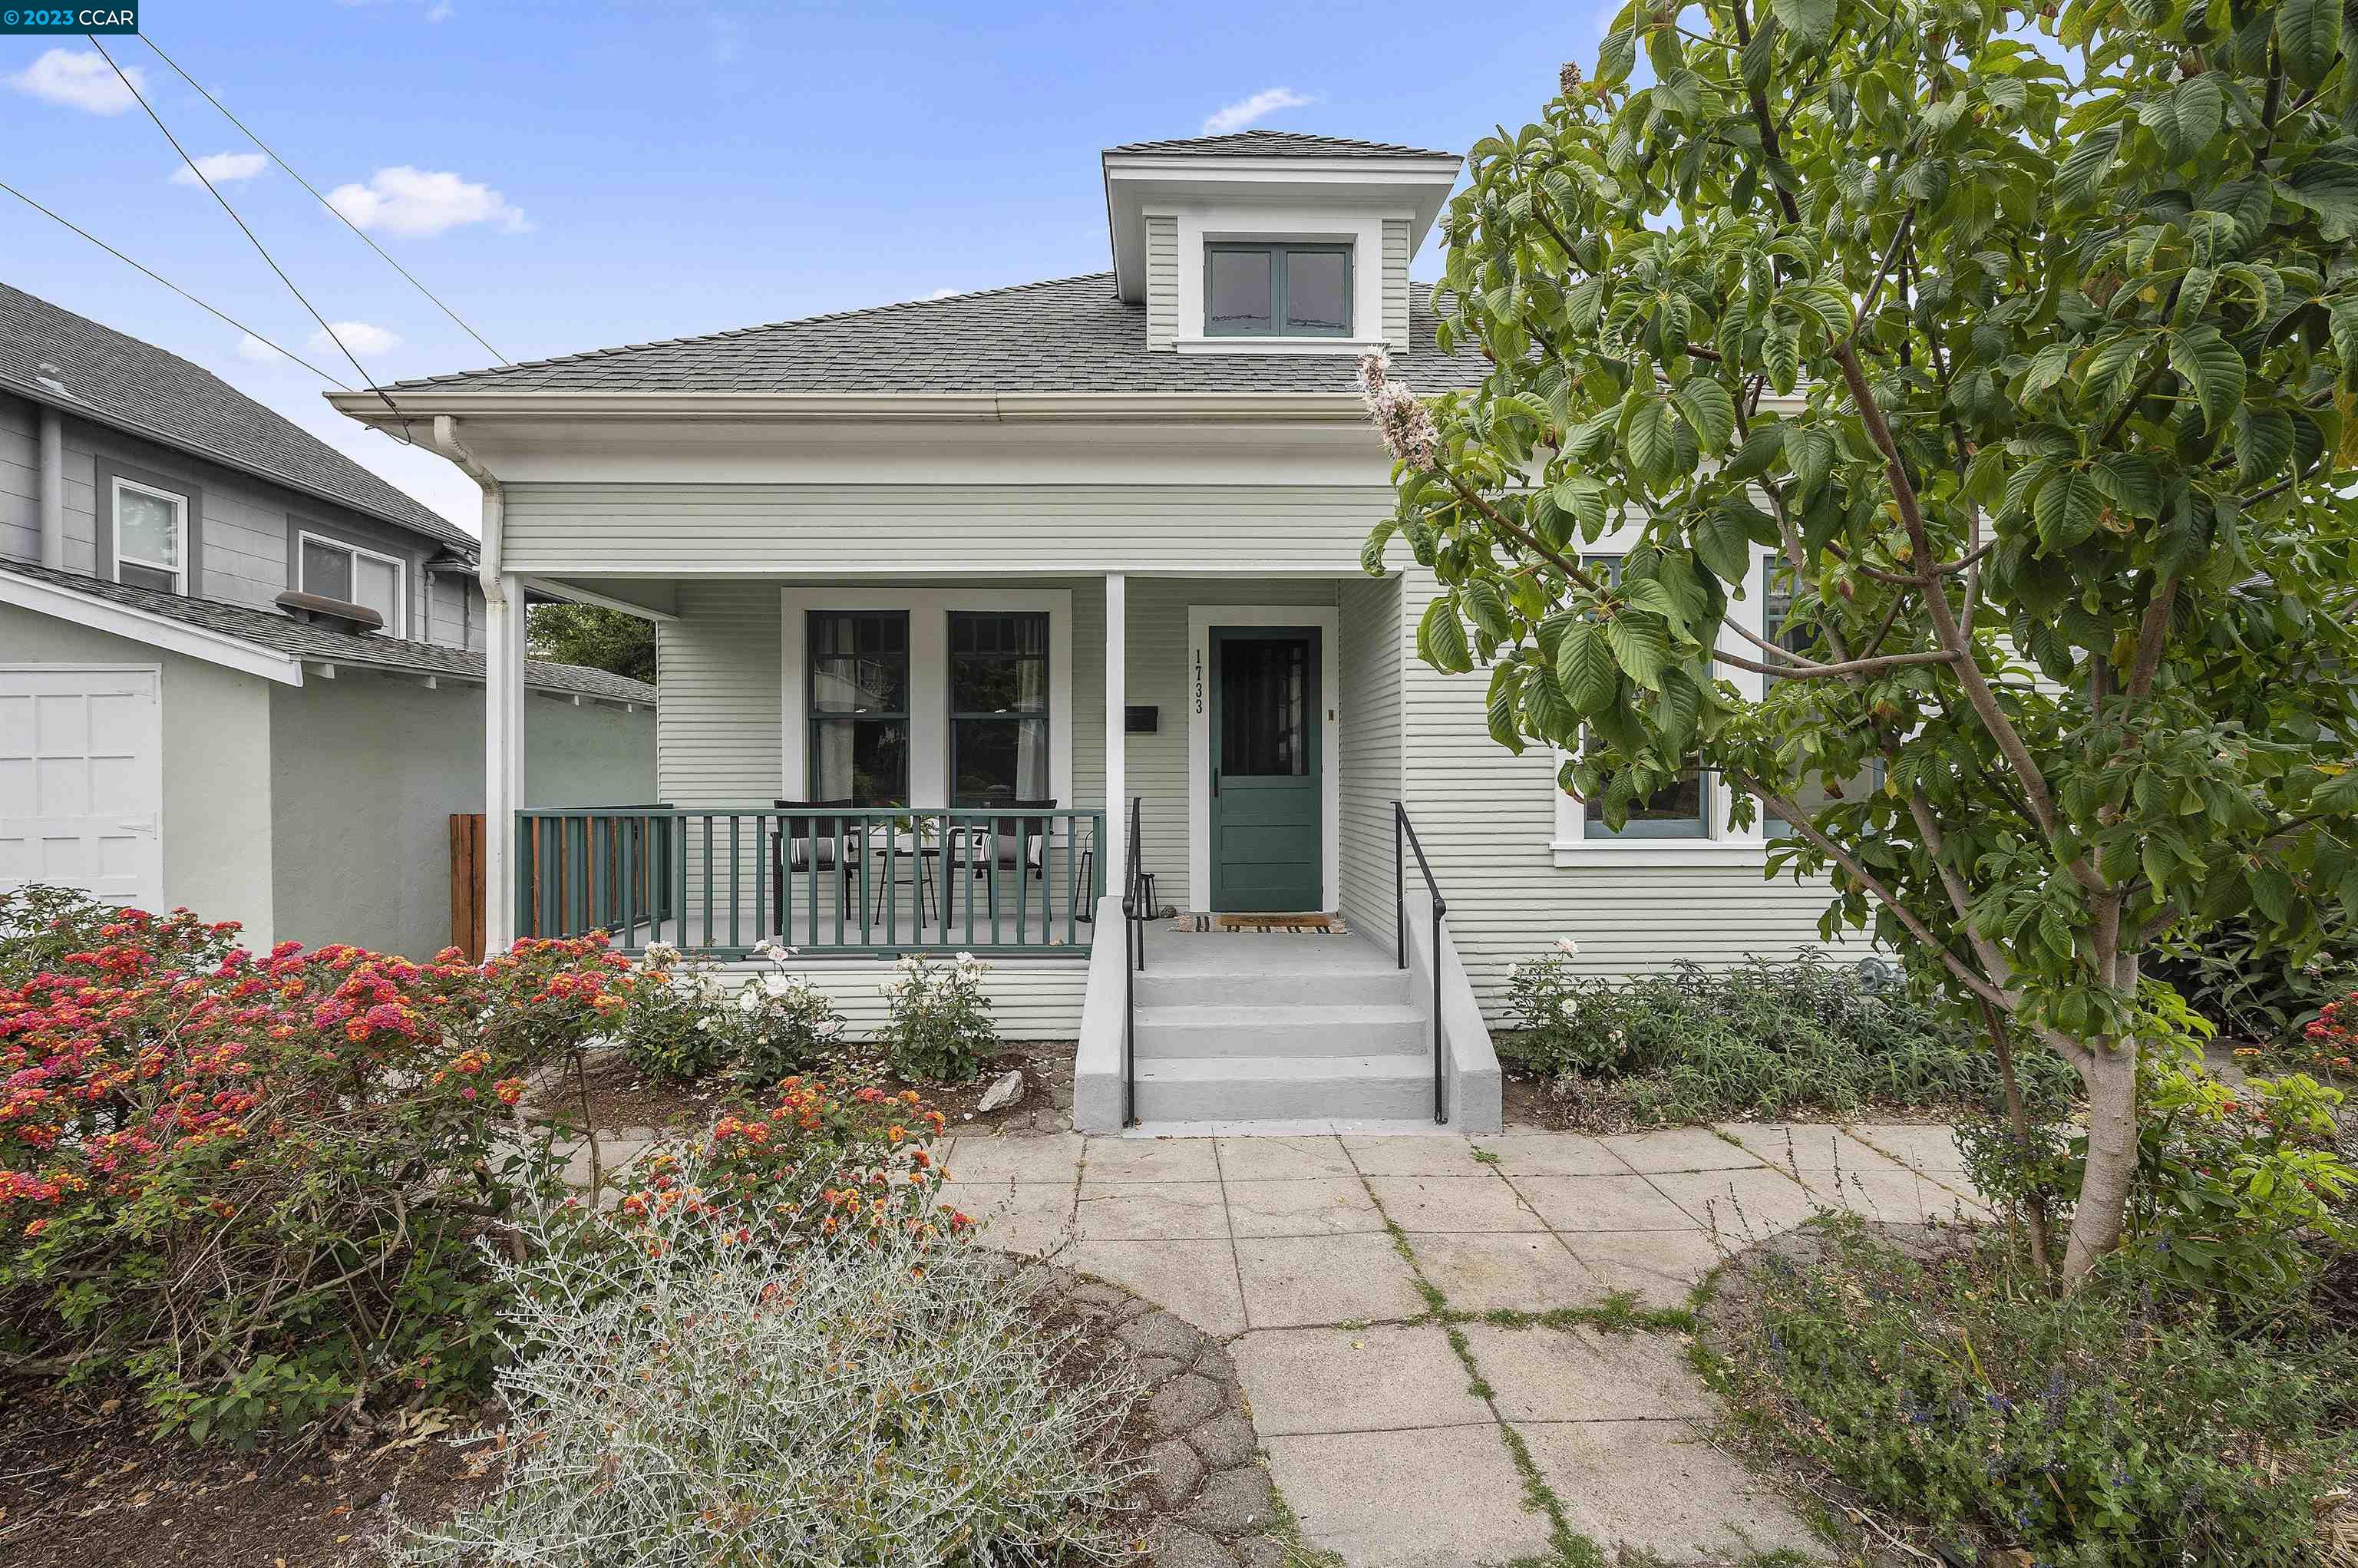 One Block to the El Cerrito Bart!!! Welcome to this California Bungalow nestled in El Cerrito! A cozy and comfortable living space with an ideal balance of functionality and simplicity, yet only a stone's throw away from the best amenities the city has to offer: public transportation, BART, Safeway, shopping centers, restaurants, and entertainment options. One story, two nice sized bedrooms, a private office, and an ADU. Surrounded by a private backyard oasis, perfect for outdoor activities, gardening, or simply enjoying the California sunshine. The kitchen was recently remodeled with high-end appliances, including a Viking range and Bosch dishwasher. The countertops are made of Caesarstone, a durable and elegant material. The interior and exterior paint was done in 2022. The electrical panel was replaced with a brand-new one. The designated elementary school is the highly sought-after Madera Elementary. The well-maintained landscaping creates a tranquil environment and enhances the overall appeal of the property.